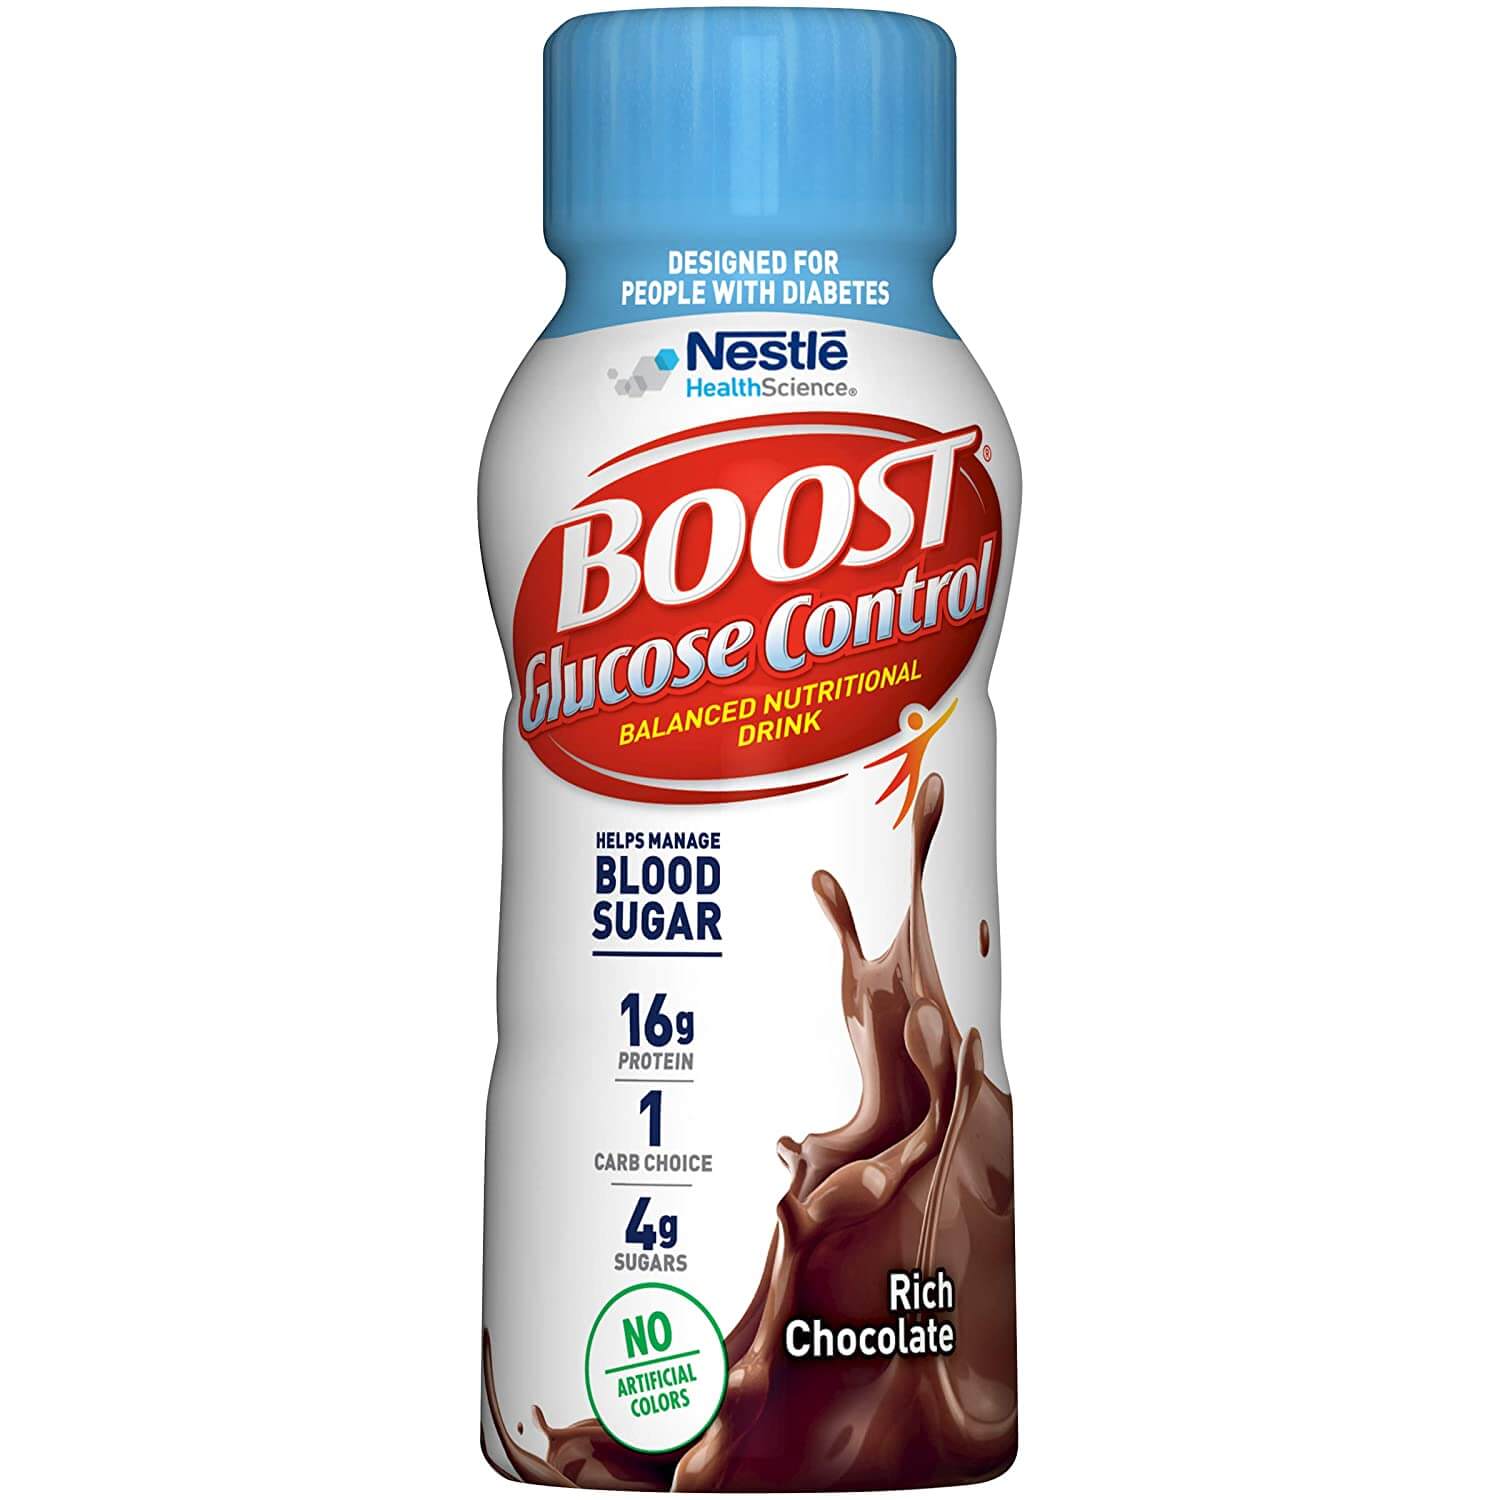 Boost Glucose Control Nutritional meal replacement Drink Review